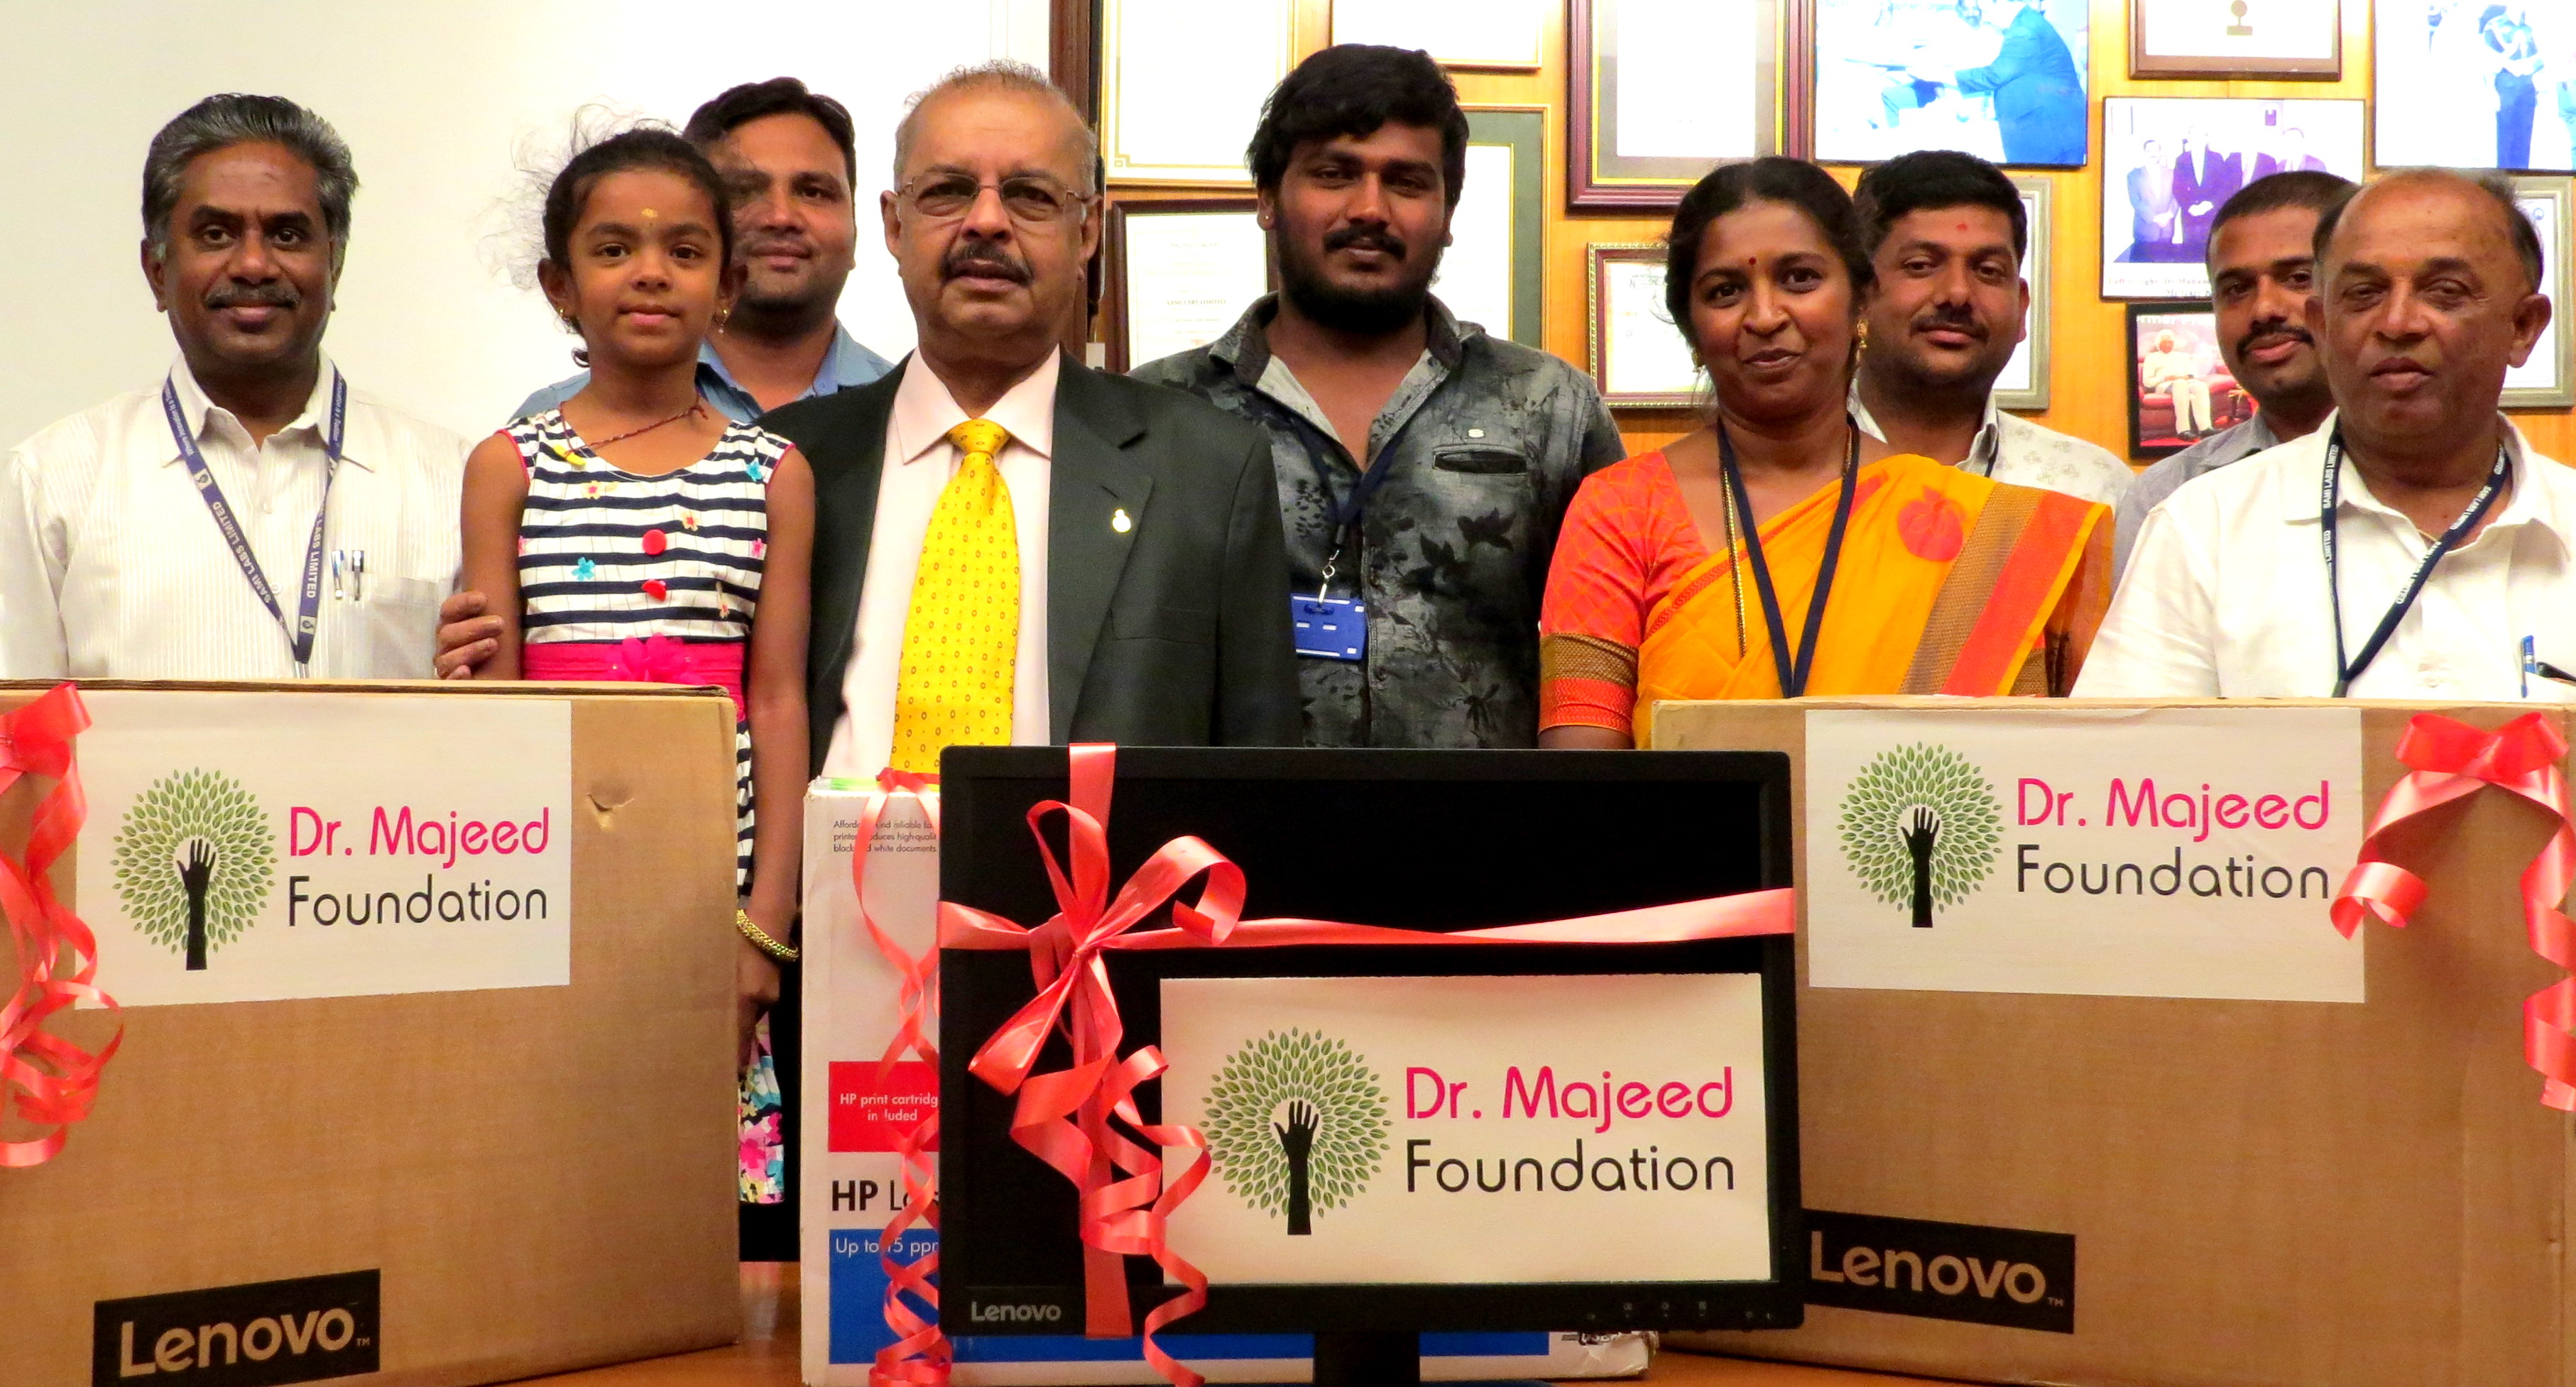 Dr. Majeed Foundation donates computers to assist educational needs of Government Higher Primary School, Bhavikere, Nelamangala Taluk, Bangalore Rural Dist